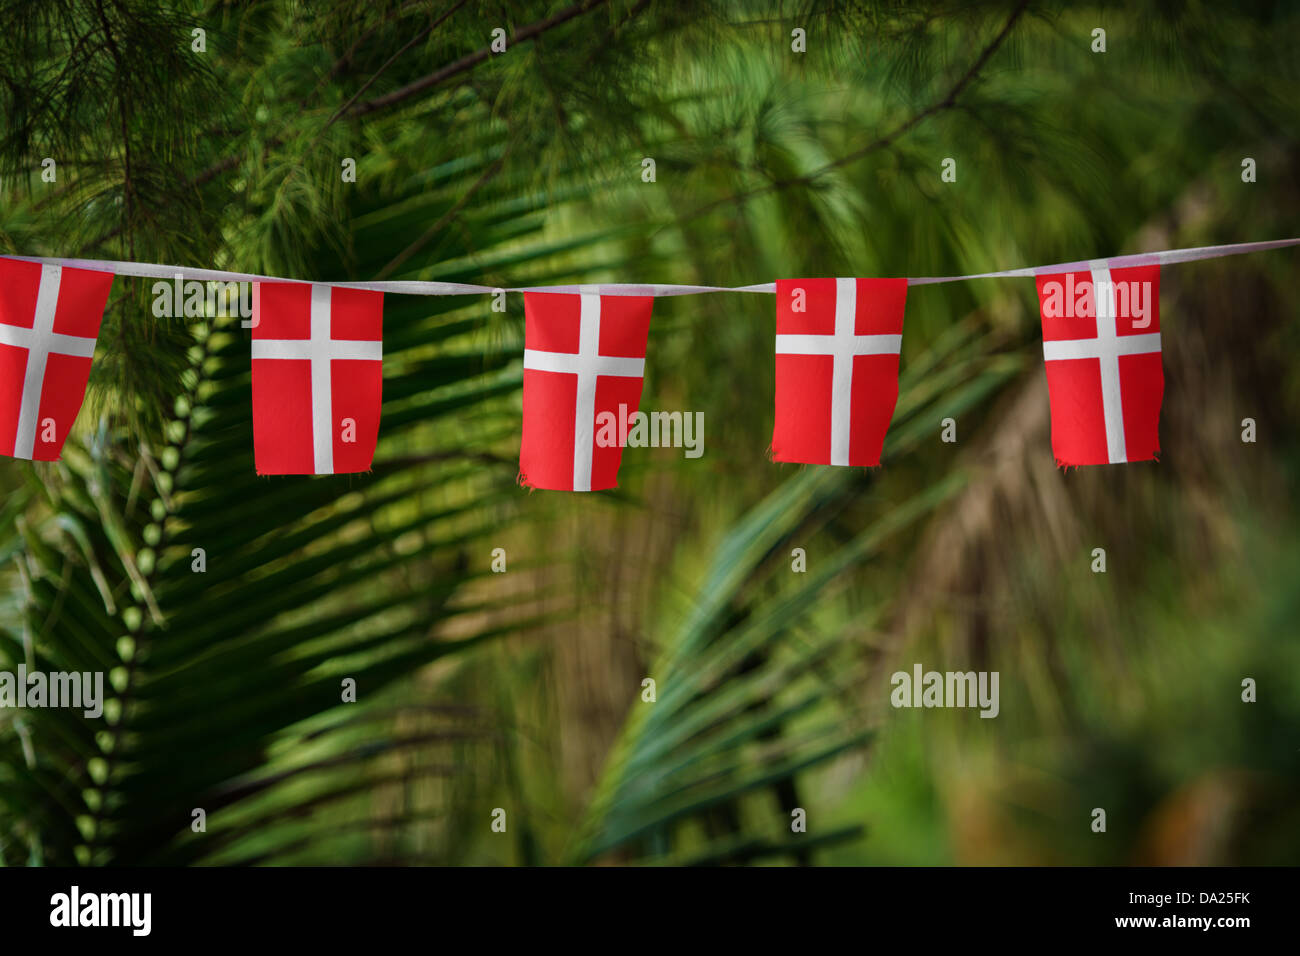 The small Danish flags decorate tropical palms in Thailand Stock Photo